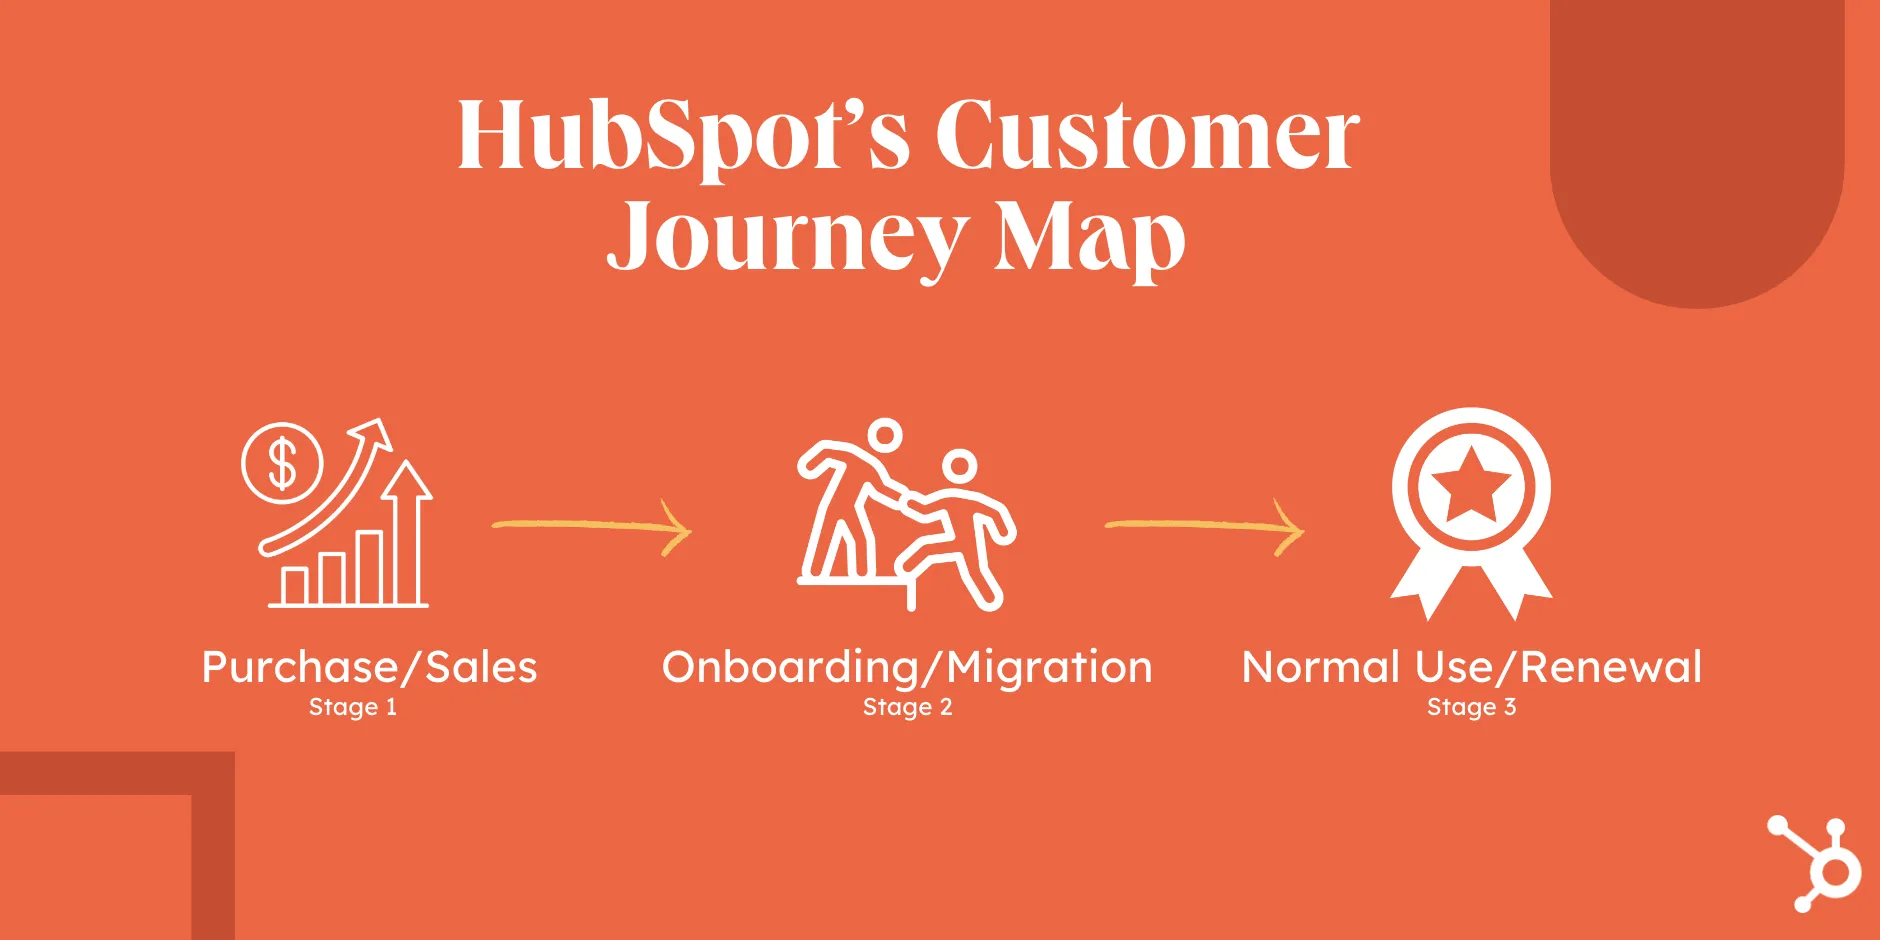 ></center></p><p>At each stage, HubSpot has a specific set of touchpoints to meet customers where they are — like using blog posts to teach customers about marketing and sales, then nurturing them slowly toward a paid subscription. Within later stages, there are several “moments” such as comparing tools, sales negotiations, technical setup, etc.</p><p>The stages may not be the same for you — in fact, your brand will likely develop a set of unique stages of the customer journey. But where do you start? Let’s discuss creating your customer journey map.</p><p>A customer journey map is a visual representation of the customer's experience with a company. It also provides insight into the needs of potential customers at every stage of this journey and the factors that directly or indirectly motivate or inhibit their progress.</p><p>The business can then use this information to improve the customer experience, increase conversions, and boost customer retention.</p><p>The customer journey map is not to be confused with a UX journey map. But, for clarity, let’s distinguish these two below.</p><h2>What is UX journey mapping?</h2><p>A UX journey map represents how a customer experiences their journey toward achieving a specific goal or completing a particular action.</p><p>For example, the term “UX journey mapping” can be used interchangeably with the term “customer journey mapping” if the goal being tracked is the user’s journey toward purchasing a product or service.</p><p>However, UX journey mapping can also be used to map the journey (i.e., actions taken) towards other goals, such as using a specific product feature.</p><h2>Why is customer journey mapping important?</h2><p>While the customer journey might seem straightforward — the company offers a product or service, and customers buy it — for most businesses, it typically isn’t.</p><p>In reality, it’s a complex journey that begins when the customer becomes problem-aware (which might be long before they become product-aware) and then moves through an intricate process of further awareness, consideration, and decision-making.</p><p>The customer is also exposed to multiple external factors (competitor ads, reviews, etc.) and touchpoints with the company (conversations with sales reps, interacting with content, viewing product demos, etc.).</p><p>Keep in mind that 80% of customers consider their experience with a company to be as important as its products.</p><p>By mapping this journey, your marketing, sales, and service teams can understand, visualize, and gain insight into each stage of the process.</p><p>You can then decrease friction along the way and make the journey as helpful and delightful as possible for your leads and customers. Customer journey mapping allows you to understand your customers’ motivations, pain points, and needs — resulting in an increased ability to provide solutions. Customers are 2.4x more likely to stick with a brand when their problems are solved quickly, so don’t miss out on the power of customers.</p><h2>What data is necessary for customer journey mapping?</h2><p>Your customer journey map isn’t just a guess based on how you think customers interact with your brand. It’s a data-driven, research-based operation that analyzes past customer behavior. So, what data should you be looking at?</p><h2>Customer Surveys and Interviews</h2><p>What better way to find out how customers think than to ask them? Customer surveys and interviews will provide first-hand information about the stage of the customer journey, their pain points, and how they use your products to solve their problems.</p><p>Surveys and interviews are referred to as Solicited Data because you have to specifically ask customers to fill out a questionnaire and provide data. Consider sending an NPS Survey to customers or asking for feedback on social media to gather the solicited data necessary for customer journey mapping. However, surveys and interviews won’t tell the whole story. That’s where unsolicited data comes in.</p><h2>Unsolicited Data</h2><p>Unsolicited data refers to all the data you collect from customers without specifically prompting them. Data points like purchase history, time spent on page, email clicks, page views, feedback from your support team, call/chat transcripts, and much more will fill in the gaps in your customer journey mapping strategy.</p><p>Unsolicited data is instrumental and much more plentiful than solicited data. While only a small number of customers will respond to surveys and questionnaires, you can collect valuable data on every customer who interacts with your brand to bolster the effectiveness and accuracy of your customer journey map.</p><p>Breaking down the customer journey, phase by phase, aligning each step with a goal, and restructuring your touchpoints accordingly are essential steps for maximizing customer success.</p><p>Here are a few more benefits to gain from customer journey mapping.</p><h2>1. You can refocus your company with an inbound perspective.</h2><p>Rather than discovering customers through outbound marketing, you can have your customers find you with the help of inbound marketing.</p><p>Outbound marketing involves tactics targeted at generalized or uninterested audiences and seeks to interrupt prospects’ daily lives. Outbound marketing is costly and inefficient. It annoys and deters customers and prospects.</p><p>Inbound marketing involves creating helpful content that customers are already looking for. You grab their attention first and focus on the sales later.</p><p>By mapping out the customer journey, you can understand what’s interesting and helpful to your customers and what’s turning them away.</p><h2>2. You can create a new target customer base.</h2><p>You need to understand the customer journey properly to understand your customers’ demographics and psychographics.</p><p>It’s a waste of time and money to repeatedly target too broad of an audience rather than people who are actually interested in your offering.</p><p>Researching the needs and pain points of your typical customers will give you a good picture of the kinds of people who are trying to achieve a goal with your company. Thus, you can hone your marketing to that specific audience.</p><h2>3. You can implement proactive customer service.</h2><p>A customer journey map is like a roadmap to the customer experience.</p><p>It highlights moments where people experience delight and situations where they might face friction. Knowing this beforehand lets you plan your customer service strategy and intervene at ideal times.</p><p>Proactive customer service also makes your brand appear more reliable. For example, when I worked in customer support, we would anticipate a surge in tickets around the holidays. To be proactive, we’d send out a message to customers letting them know about our team’s adjusted holiday hours. We would also tell them about additional support options if we were unavailable and what to do if an urgent problem needed immediate attention.</p><p>With expectations set, customers won’t feel surprised if they’re waiting on hold a little longer than usual. They’ll even have alternative options to choose from — like a chatbot or knowledge base — if they need to find a faster solution.</p><p><center><a href=